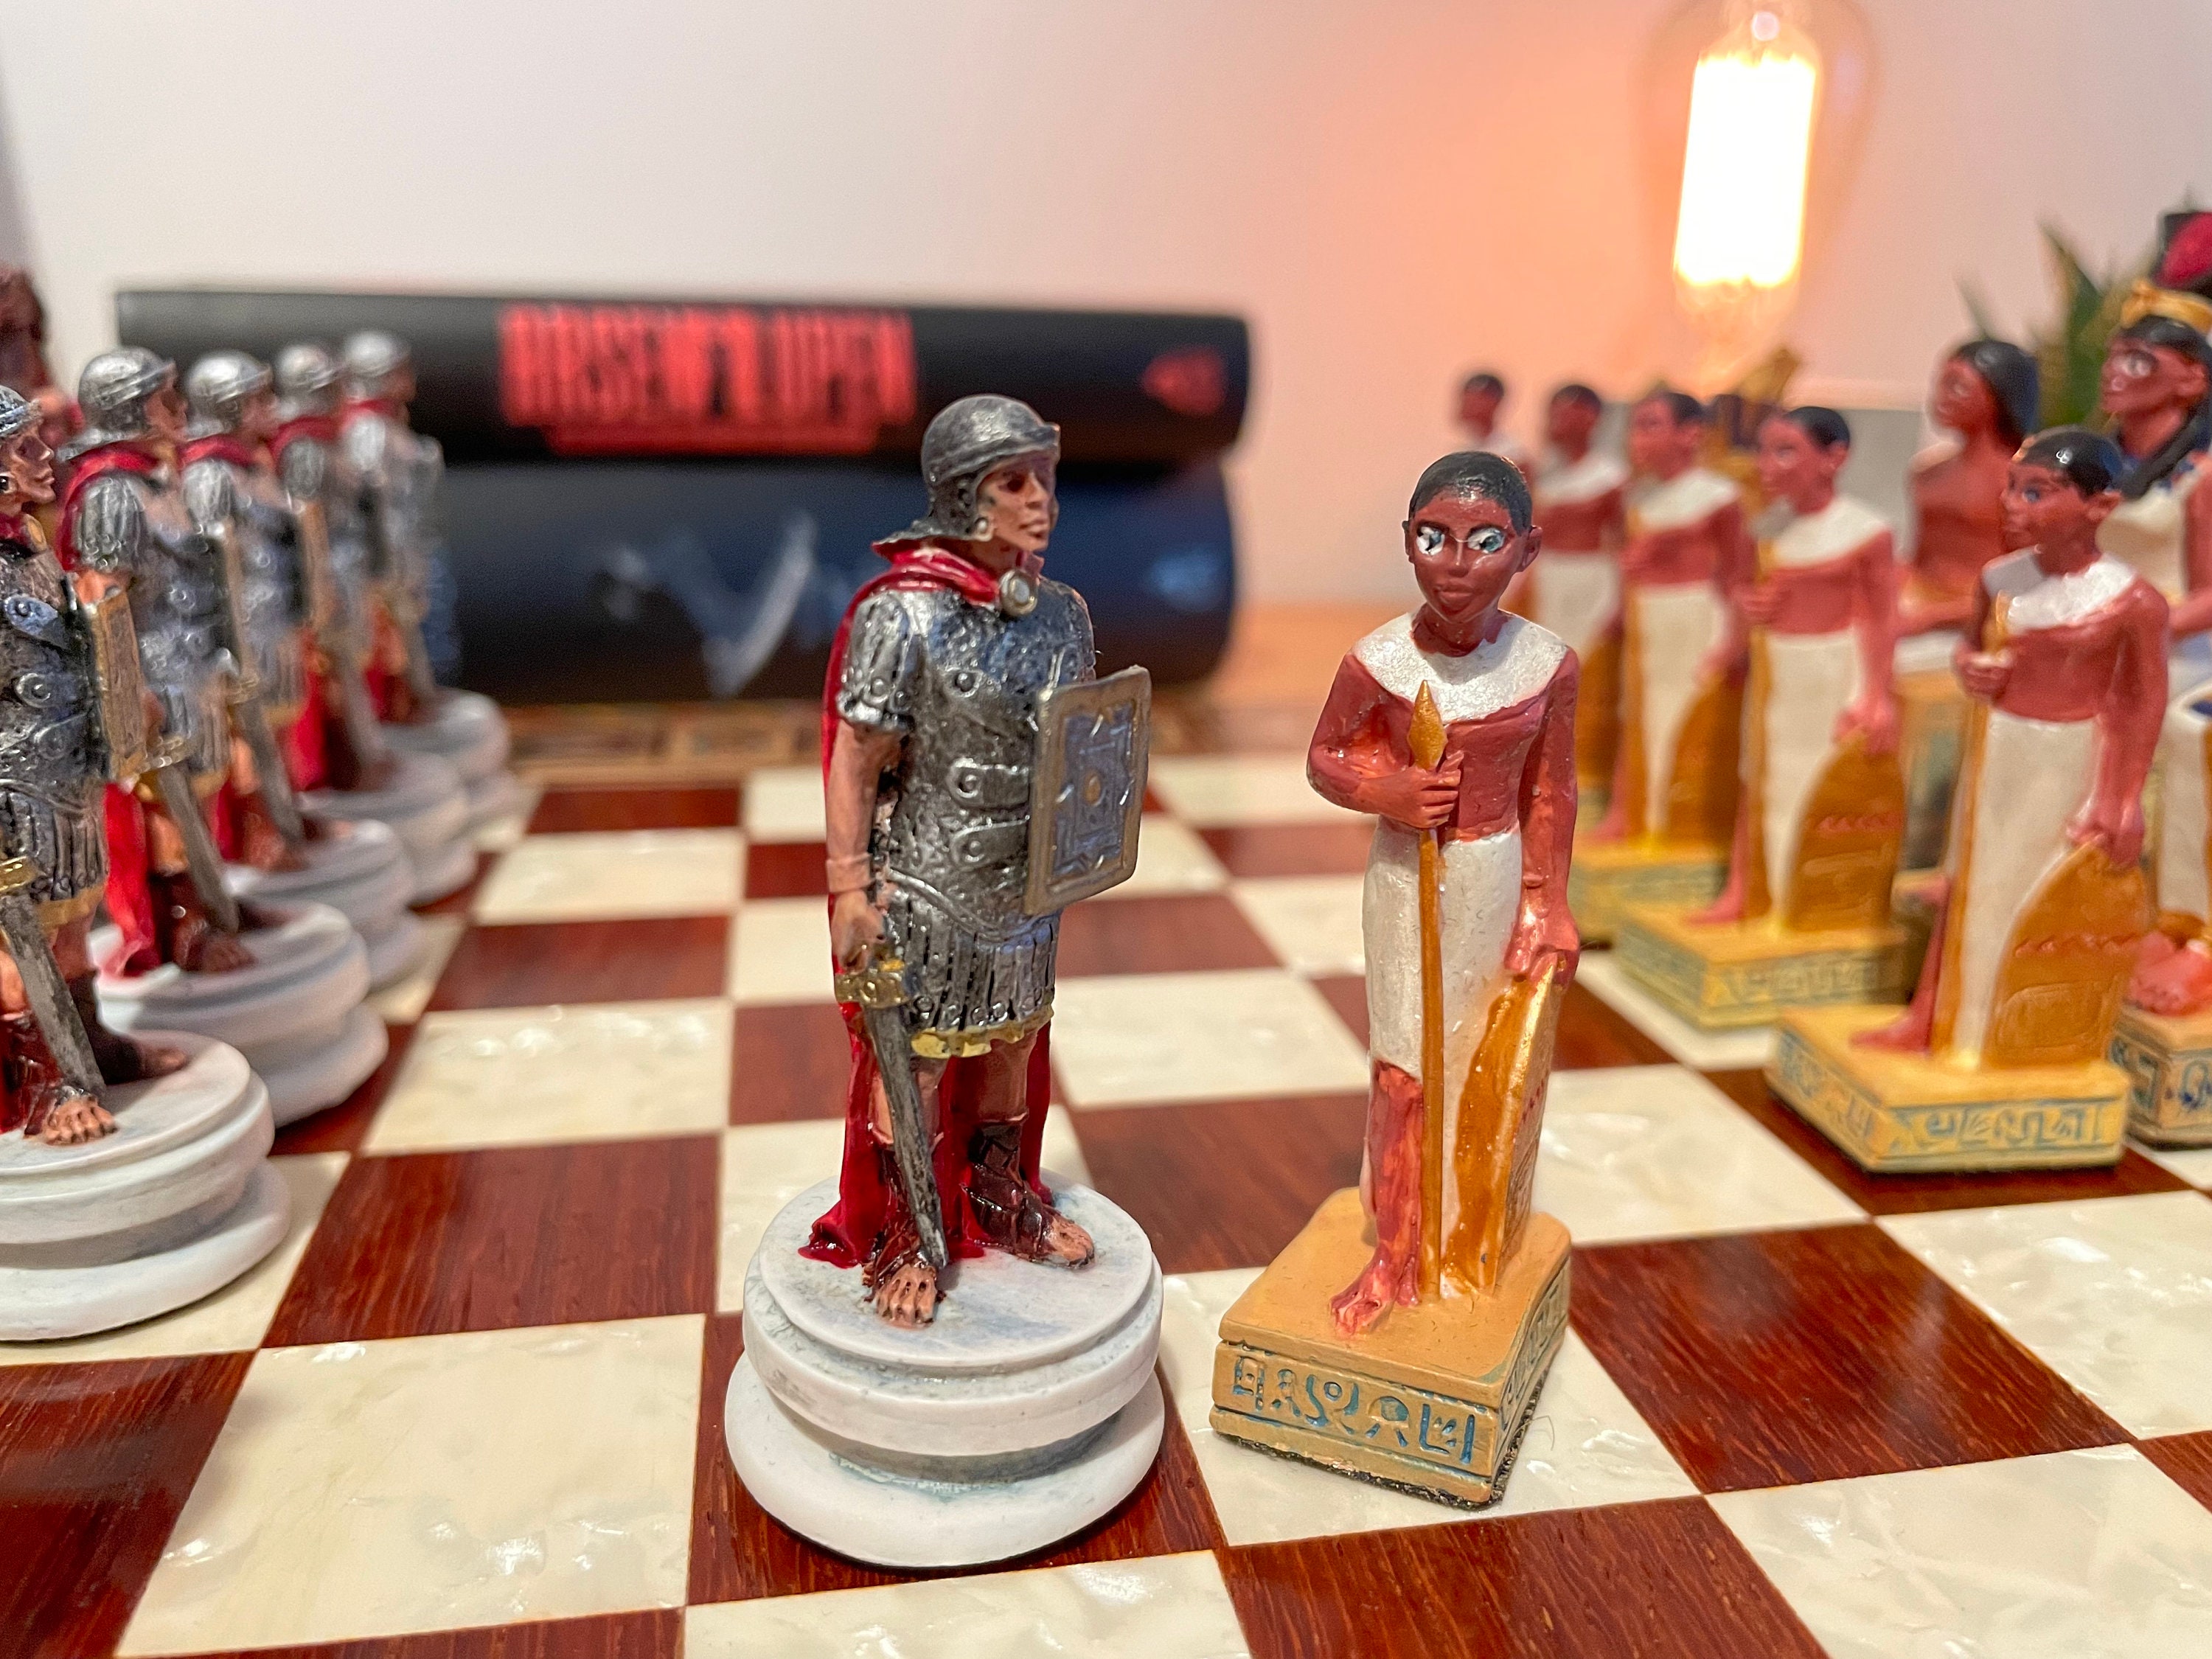 Egypt Vs Rome Chess Set with Glass Board